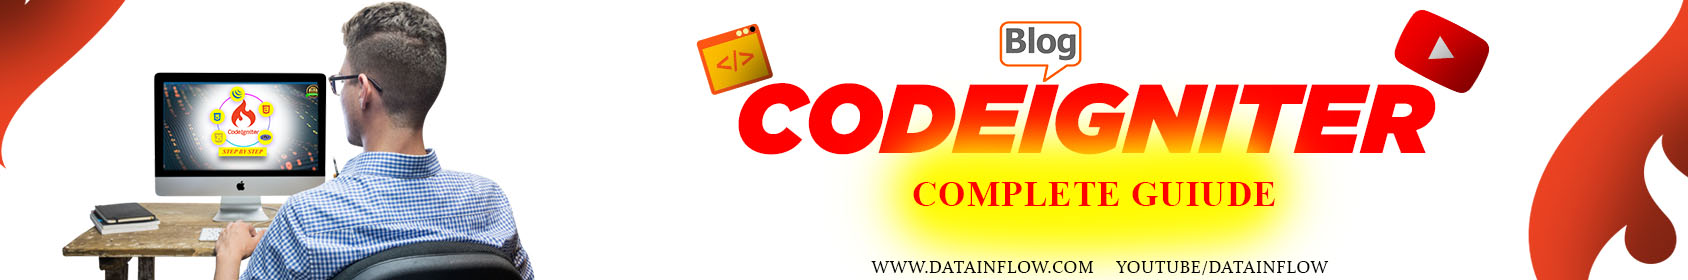 datainflow codeigniter series - how to add swal or SweetAlert in codeigniter a tag | SweetAlert in php codeigniter | web development - datainflow